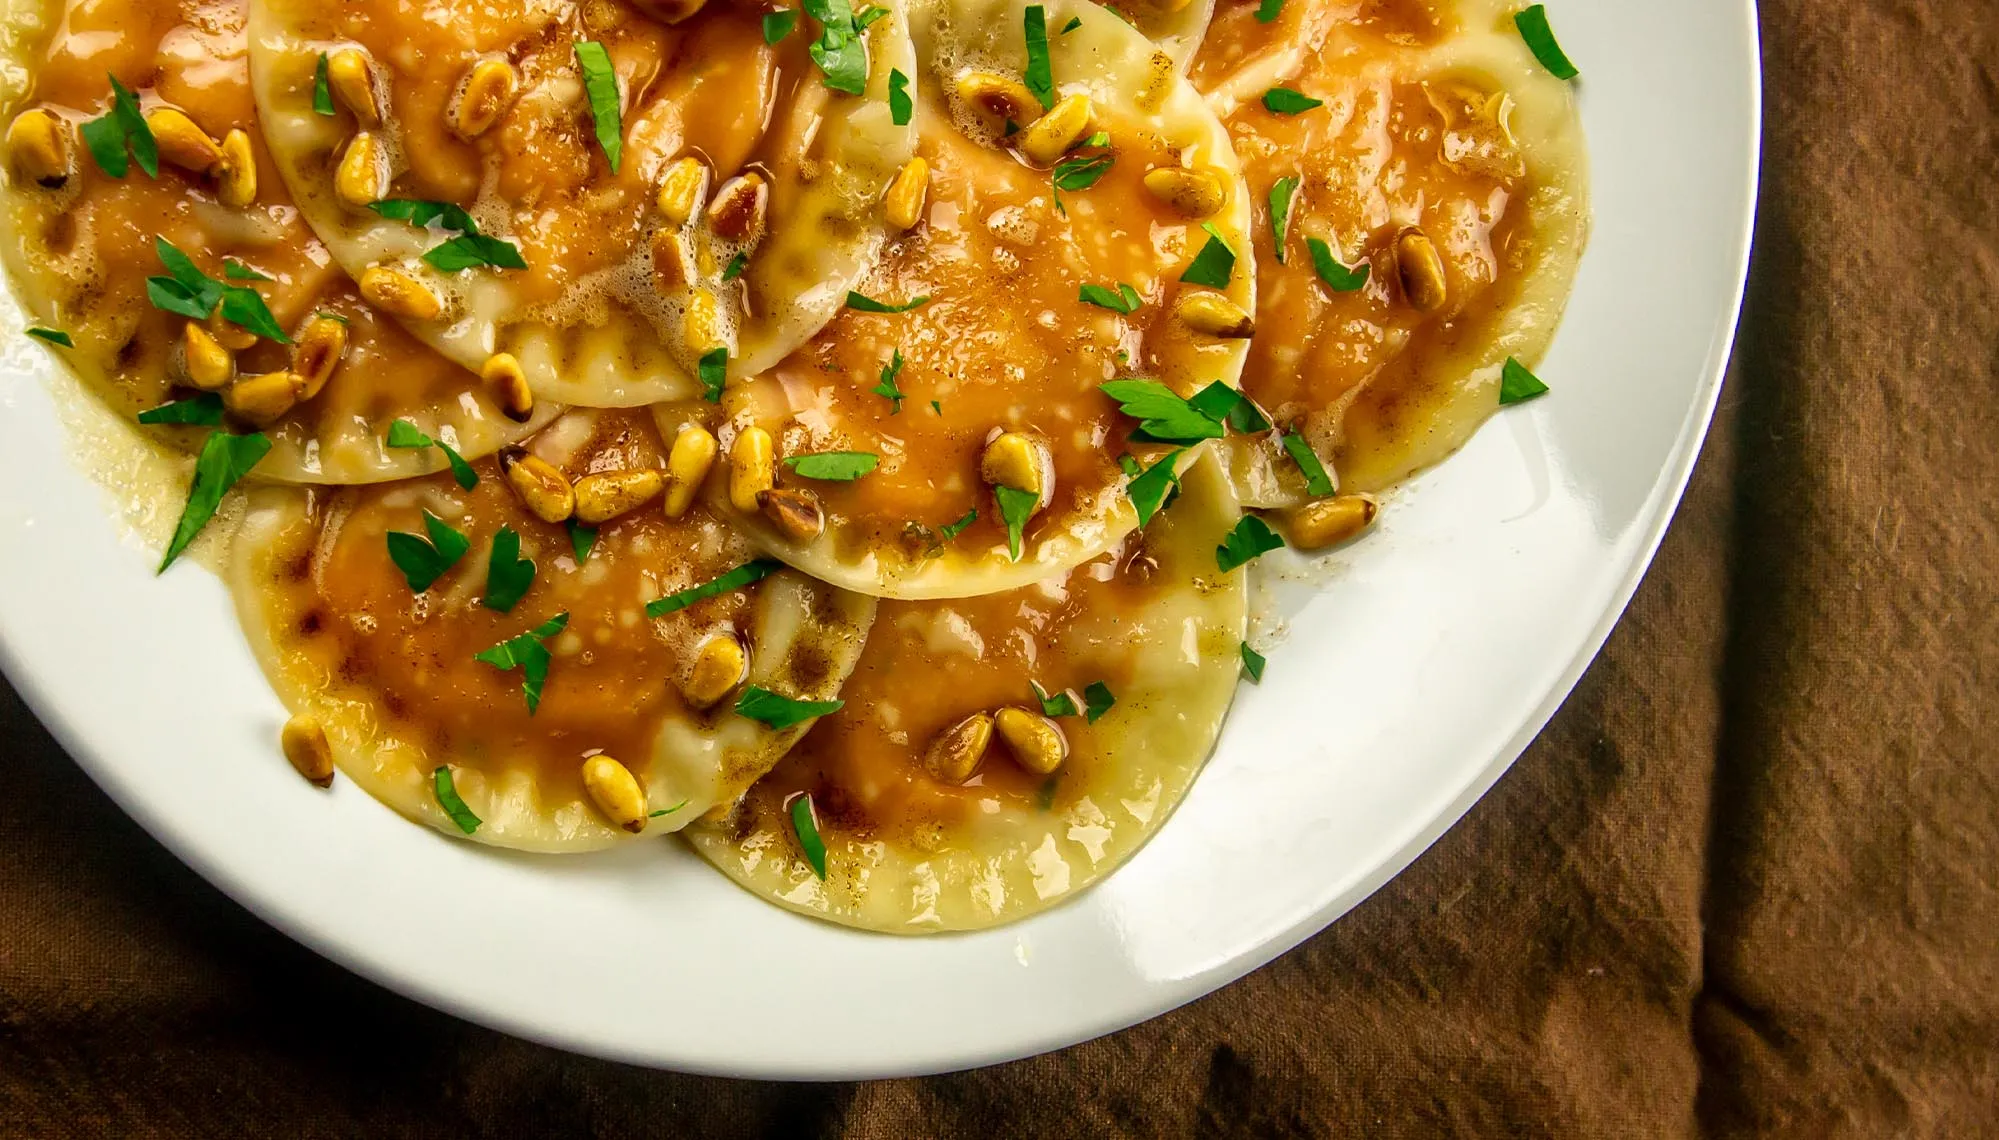 ravioli with sweet potato filling topped with a browned butter sauce and pine nuts